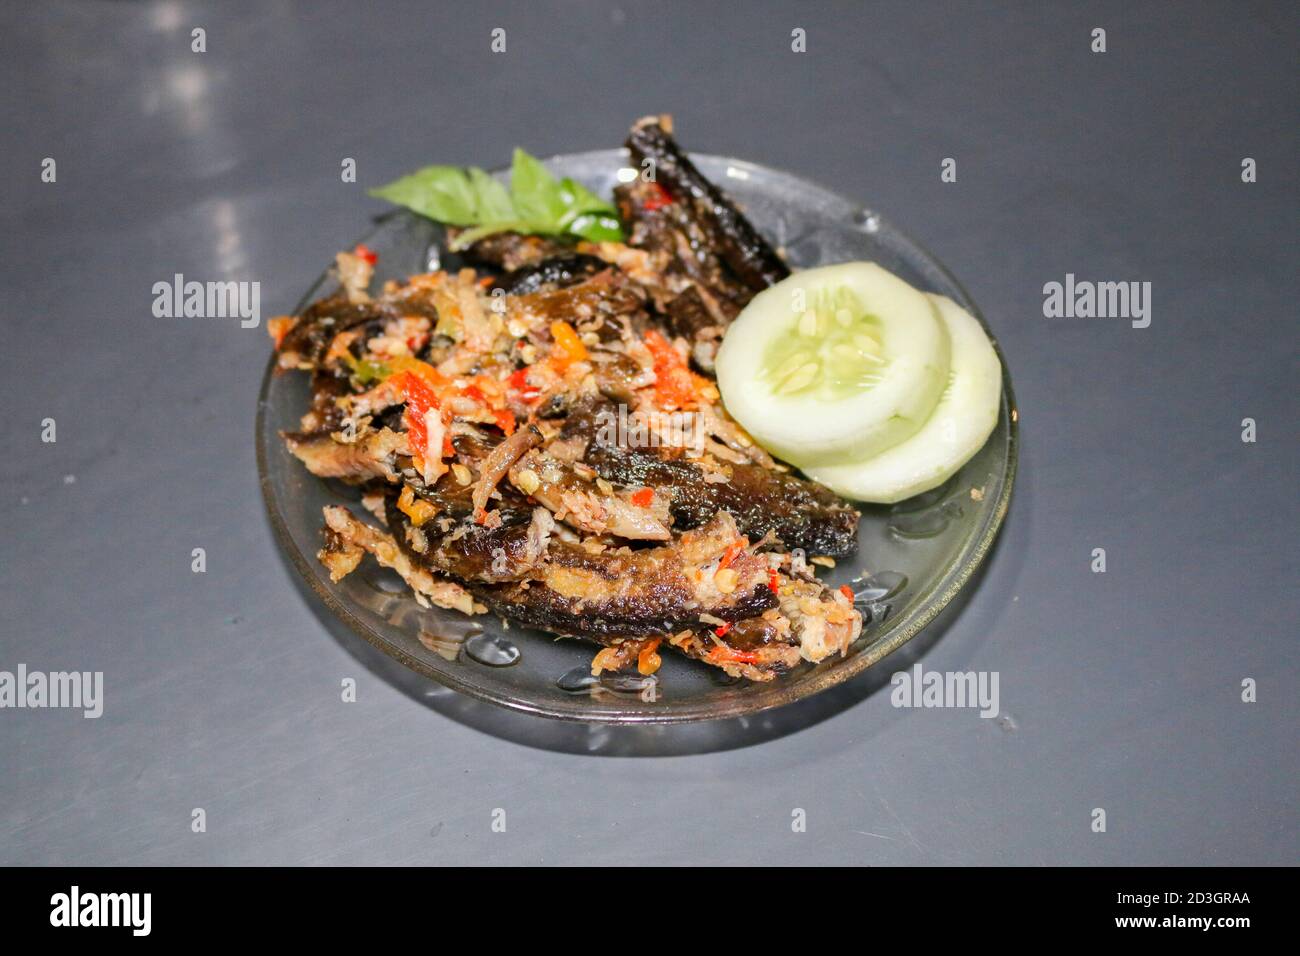 Sambal Belut or Spicy Fried Eel Delicious traditional food from Indonesia made from Eel and Chilies. Stock Photo